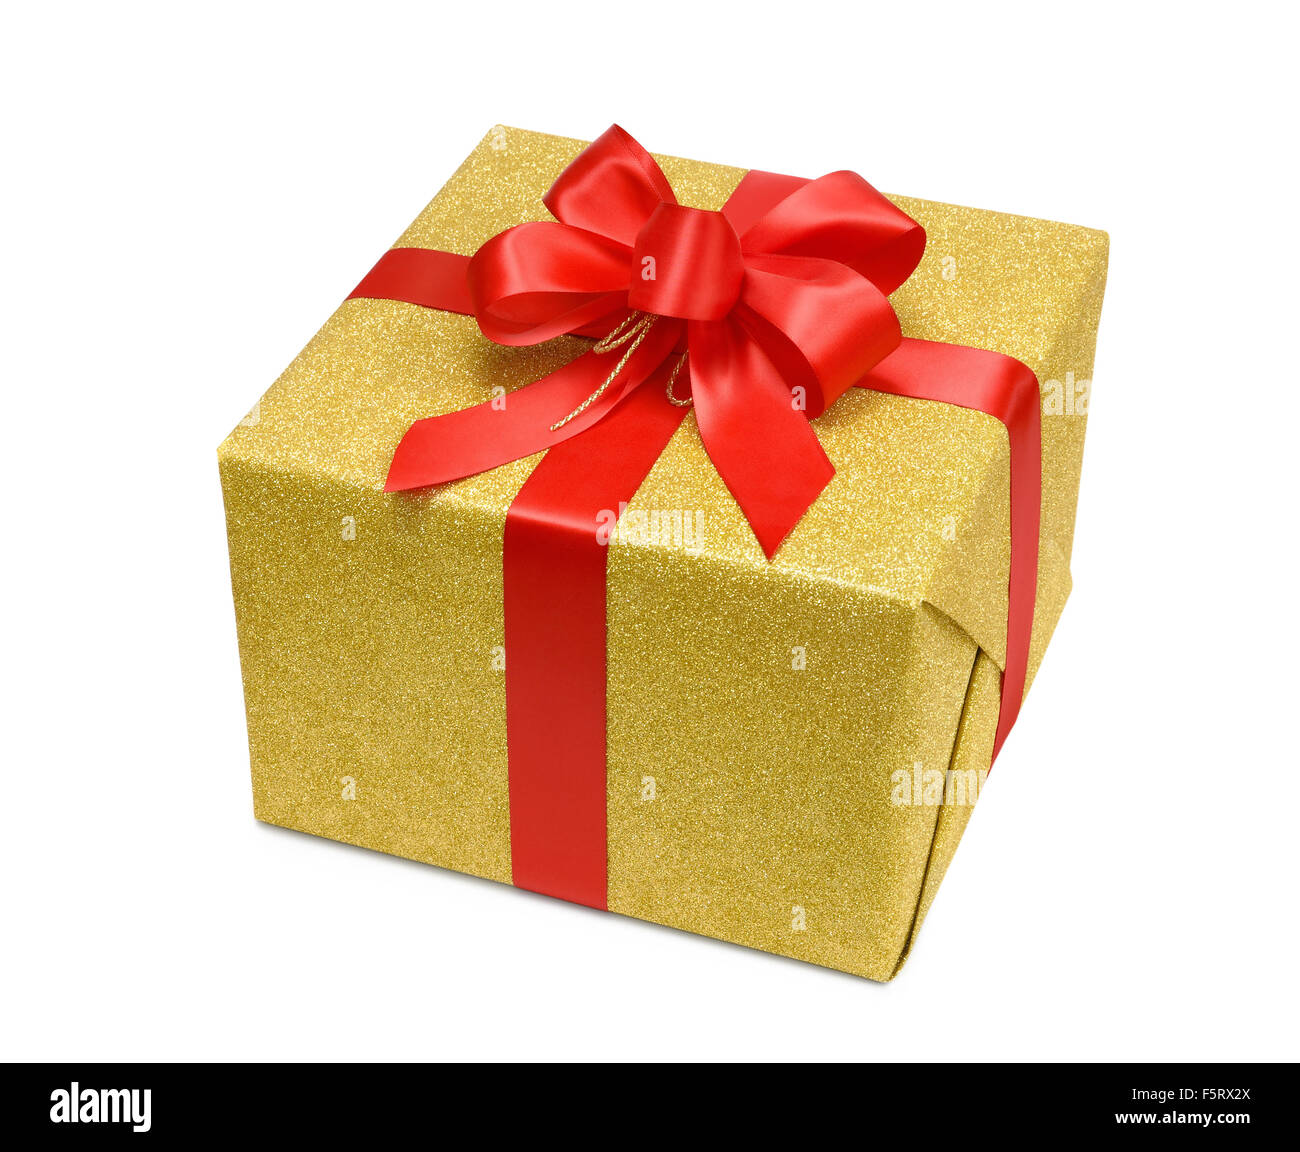 Glittering gold gift box on white background with a nice red bow Stock Photo